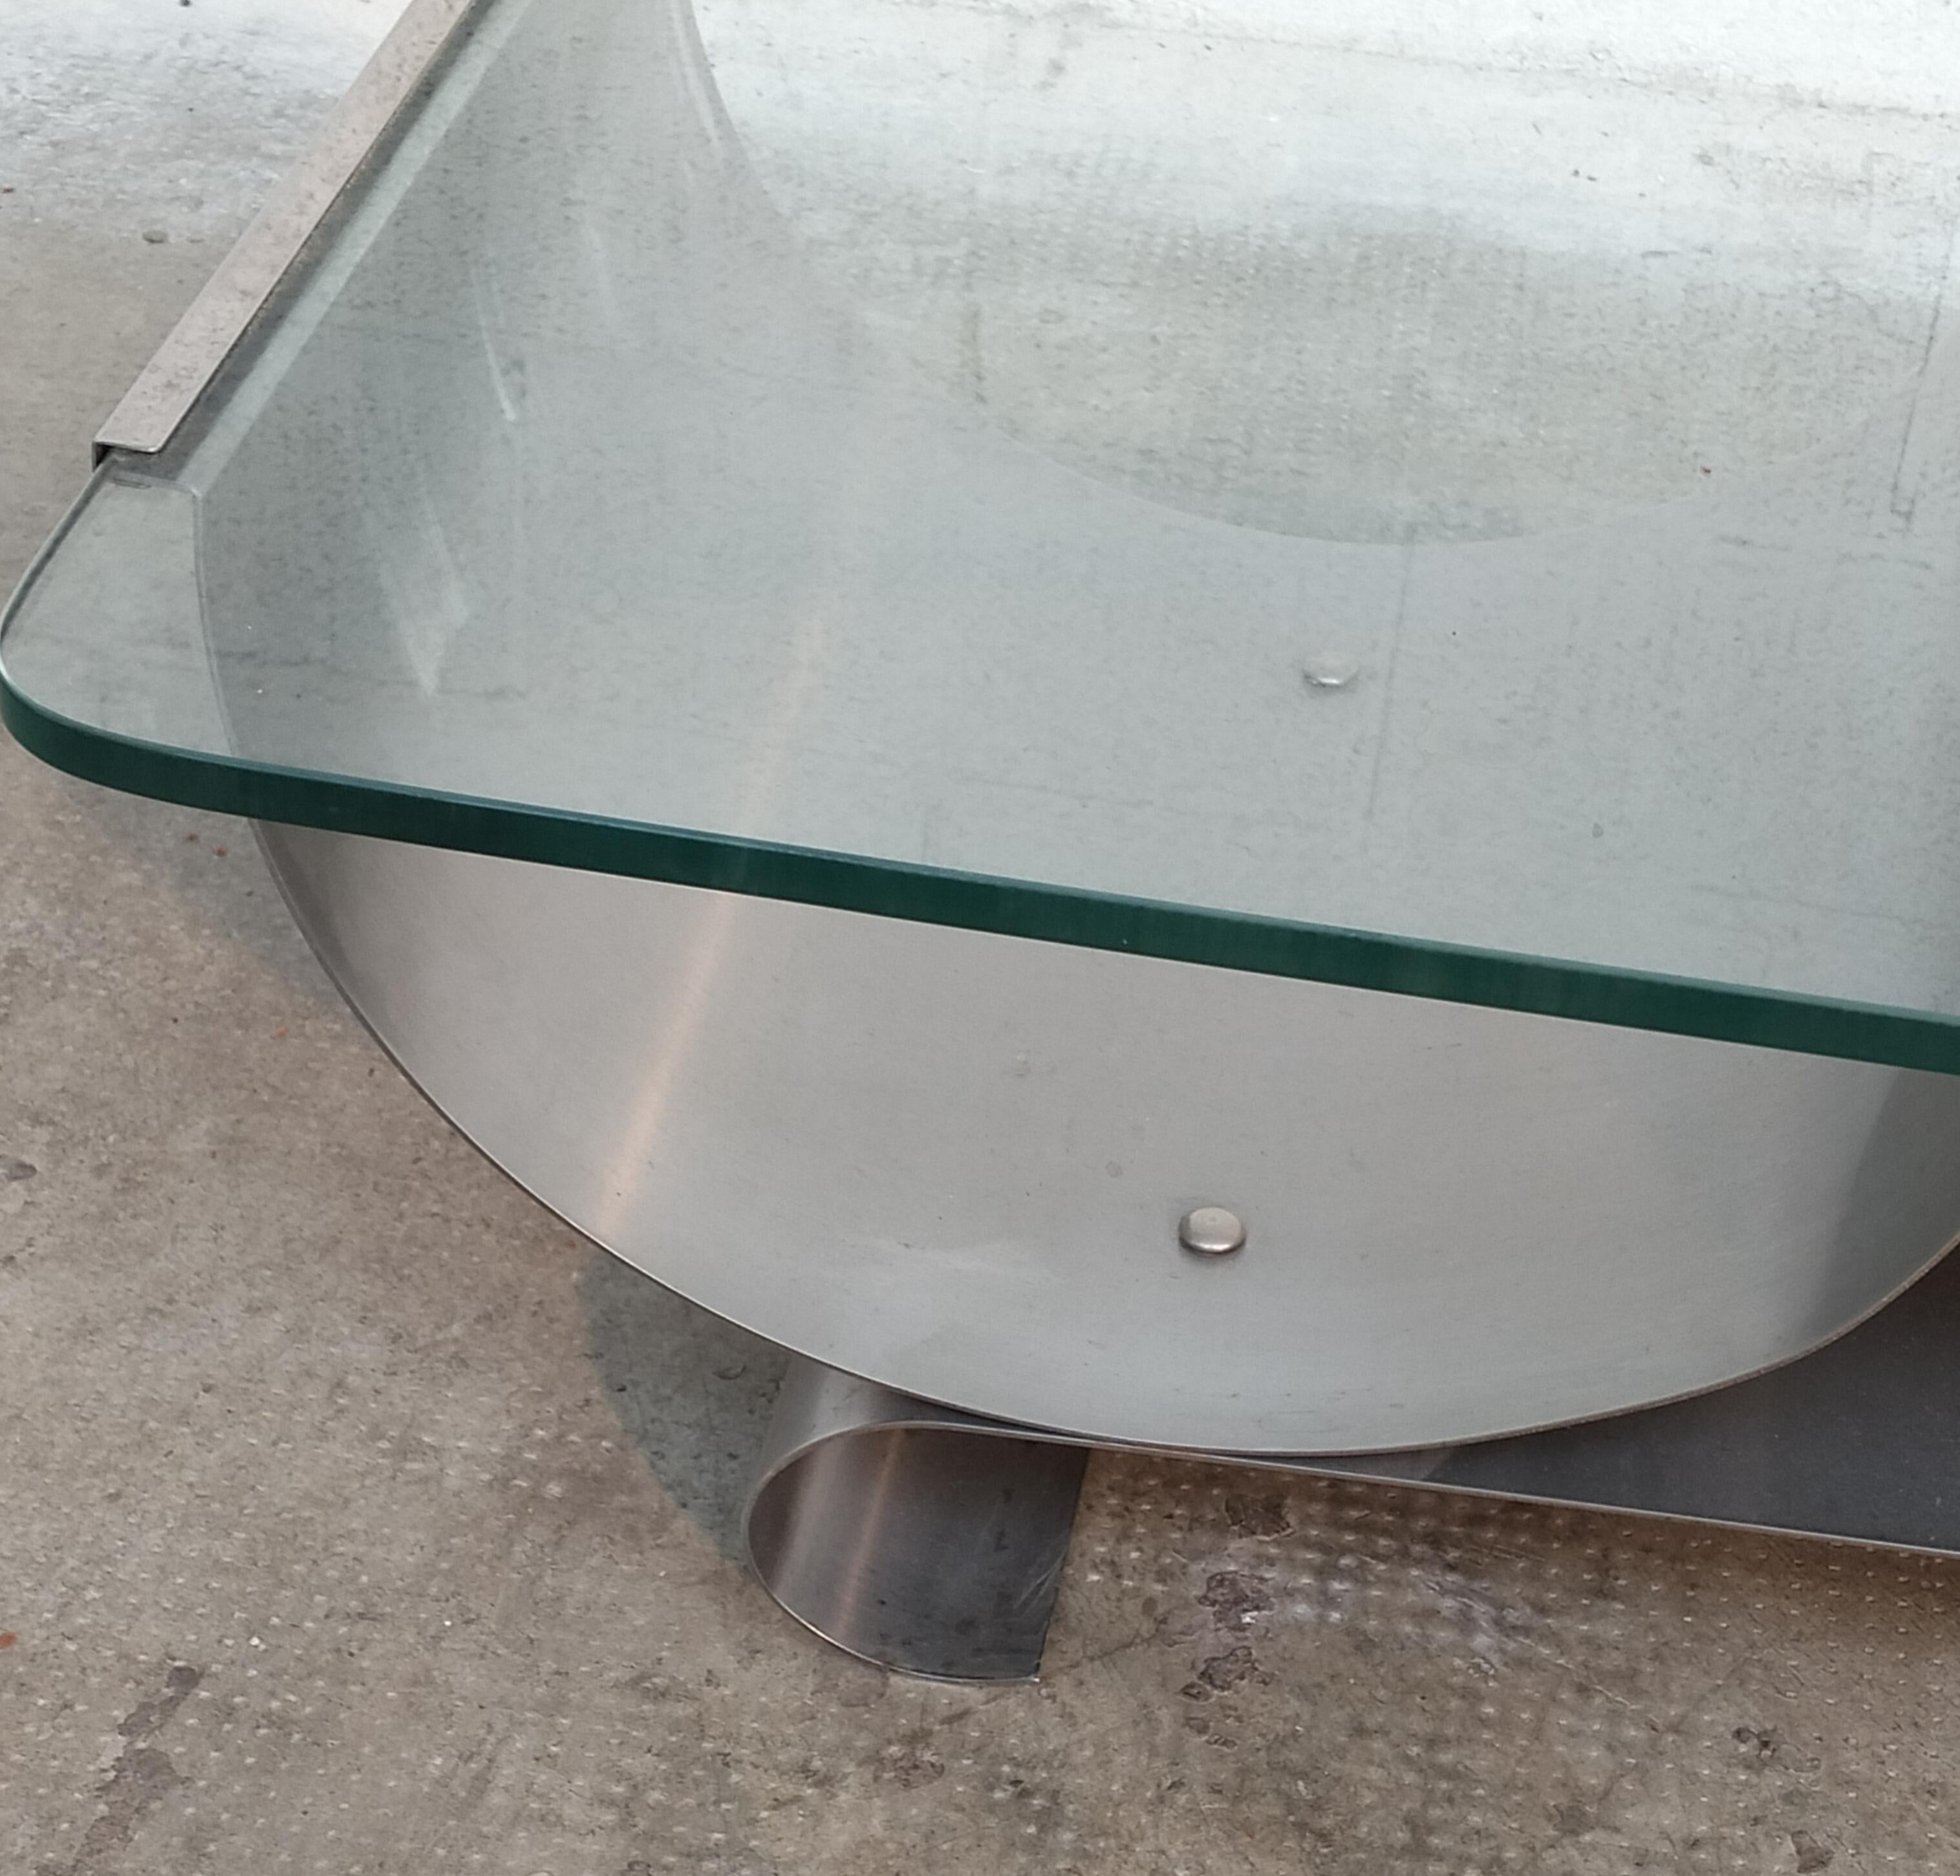 Stainless Steel and Glass Coffee Table by Francois Monnet for Kappa 70s 2